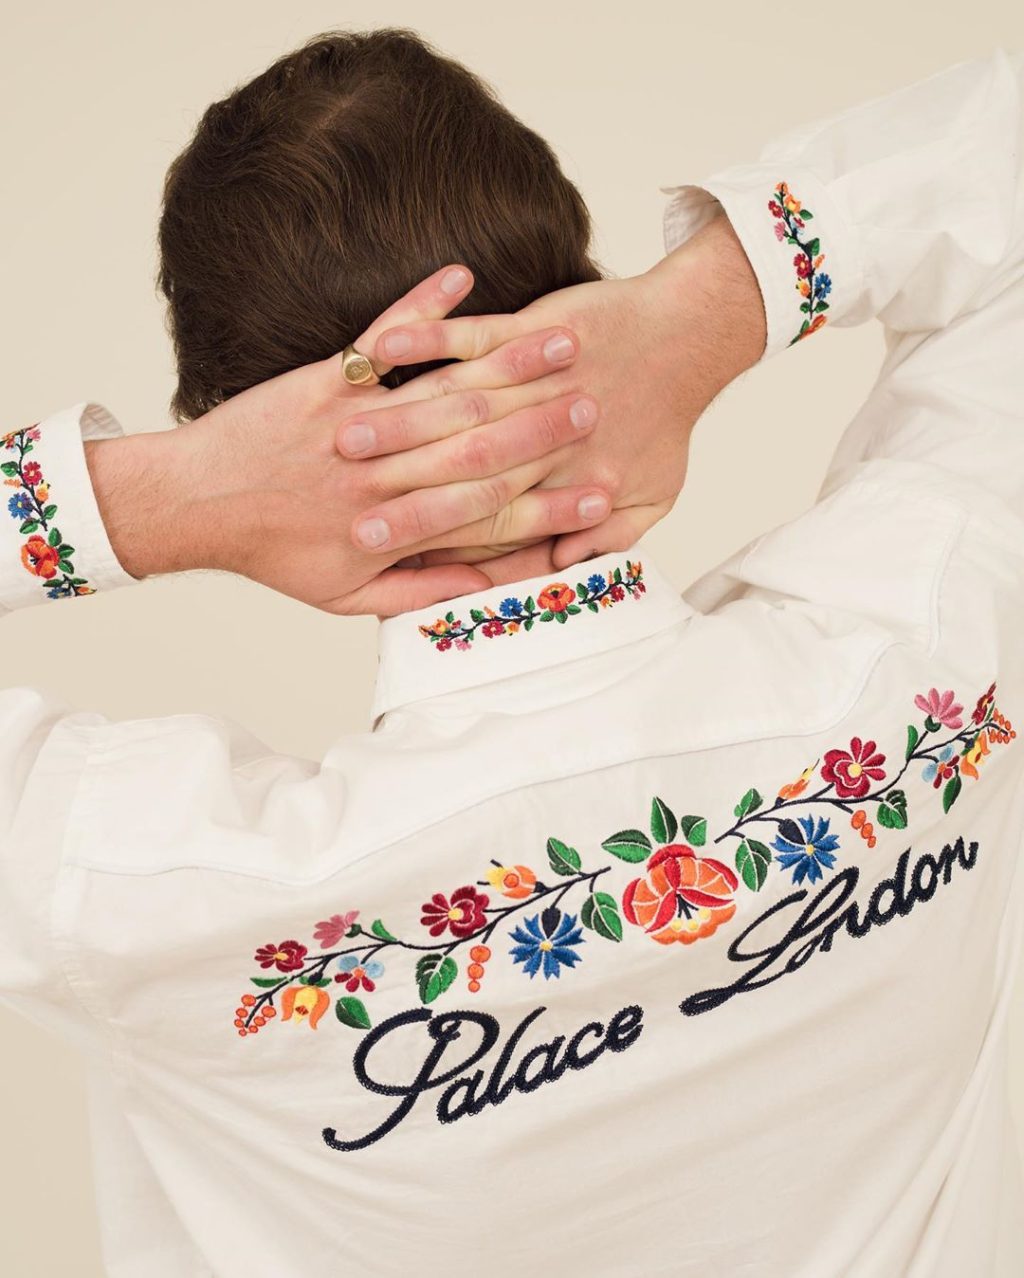 palaceskateboards-2020-summer-collection-release-info